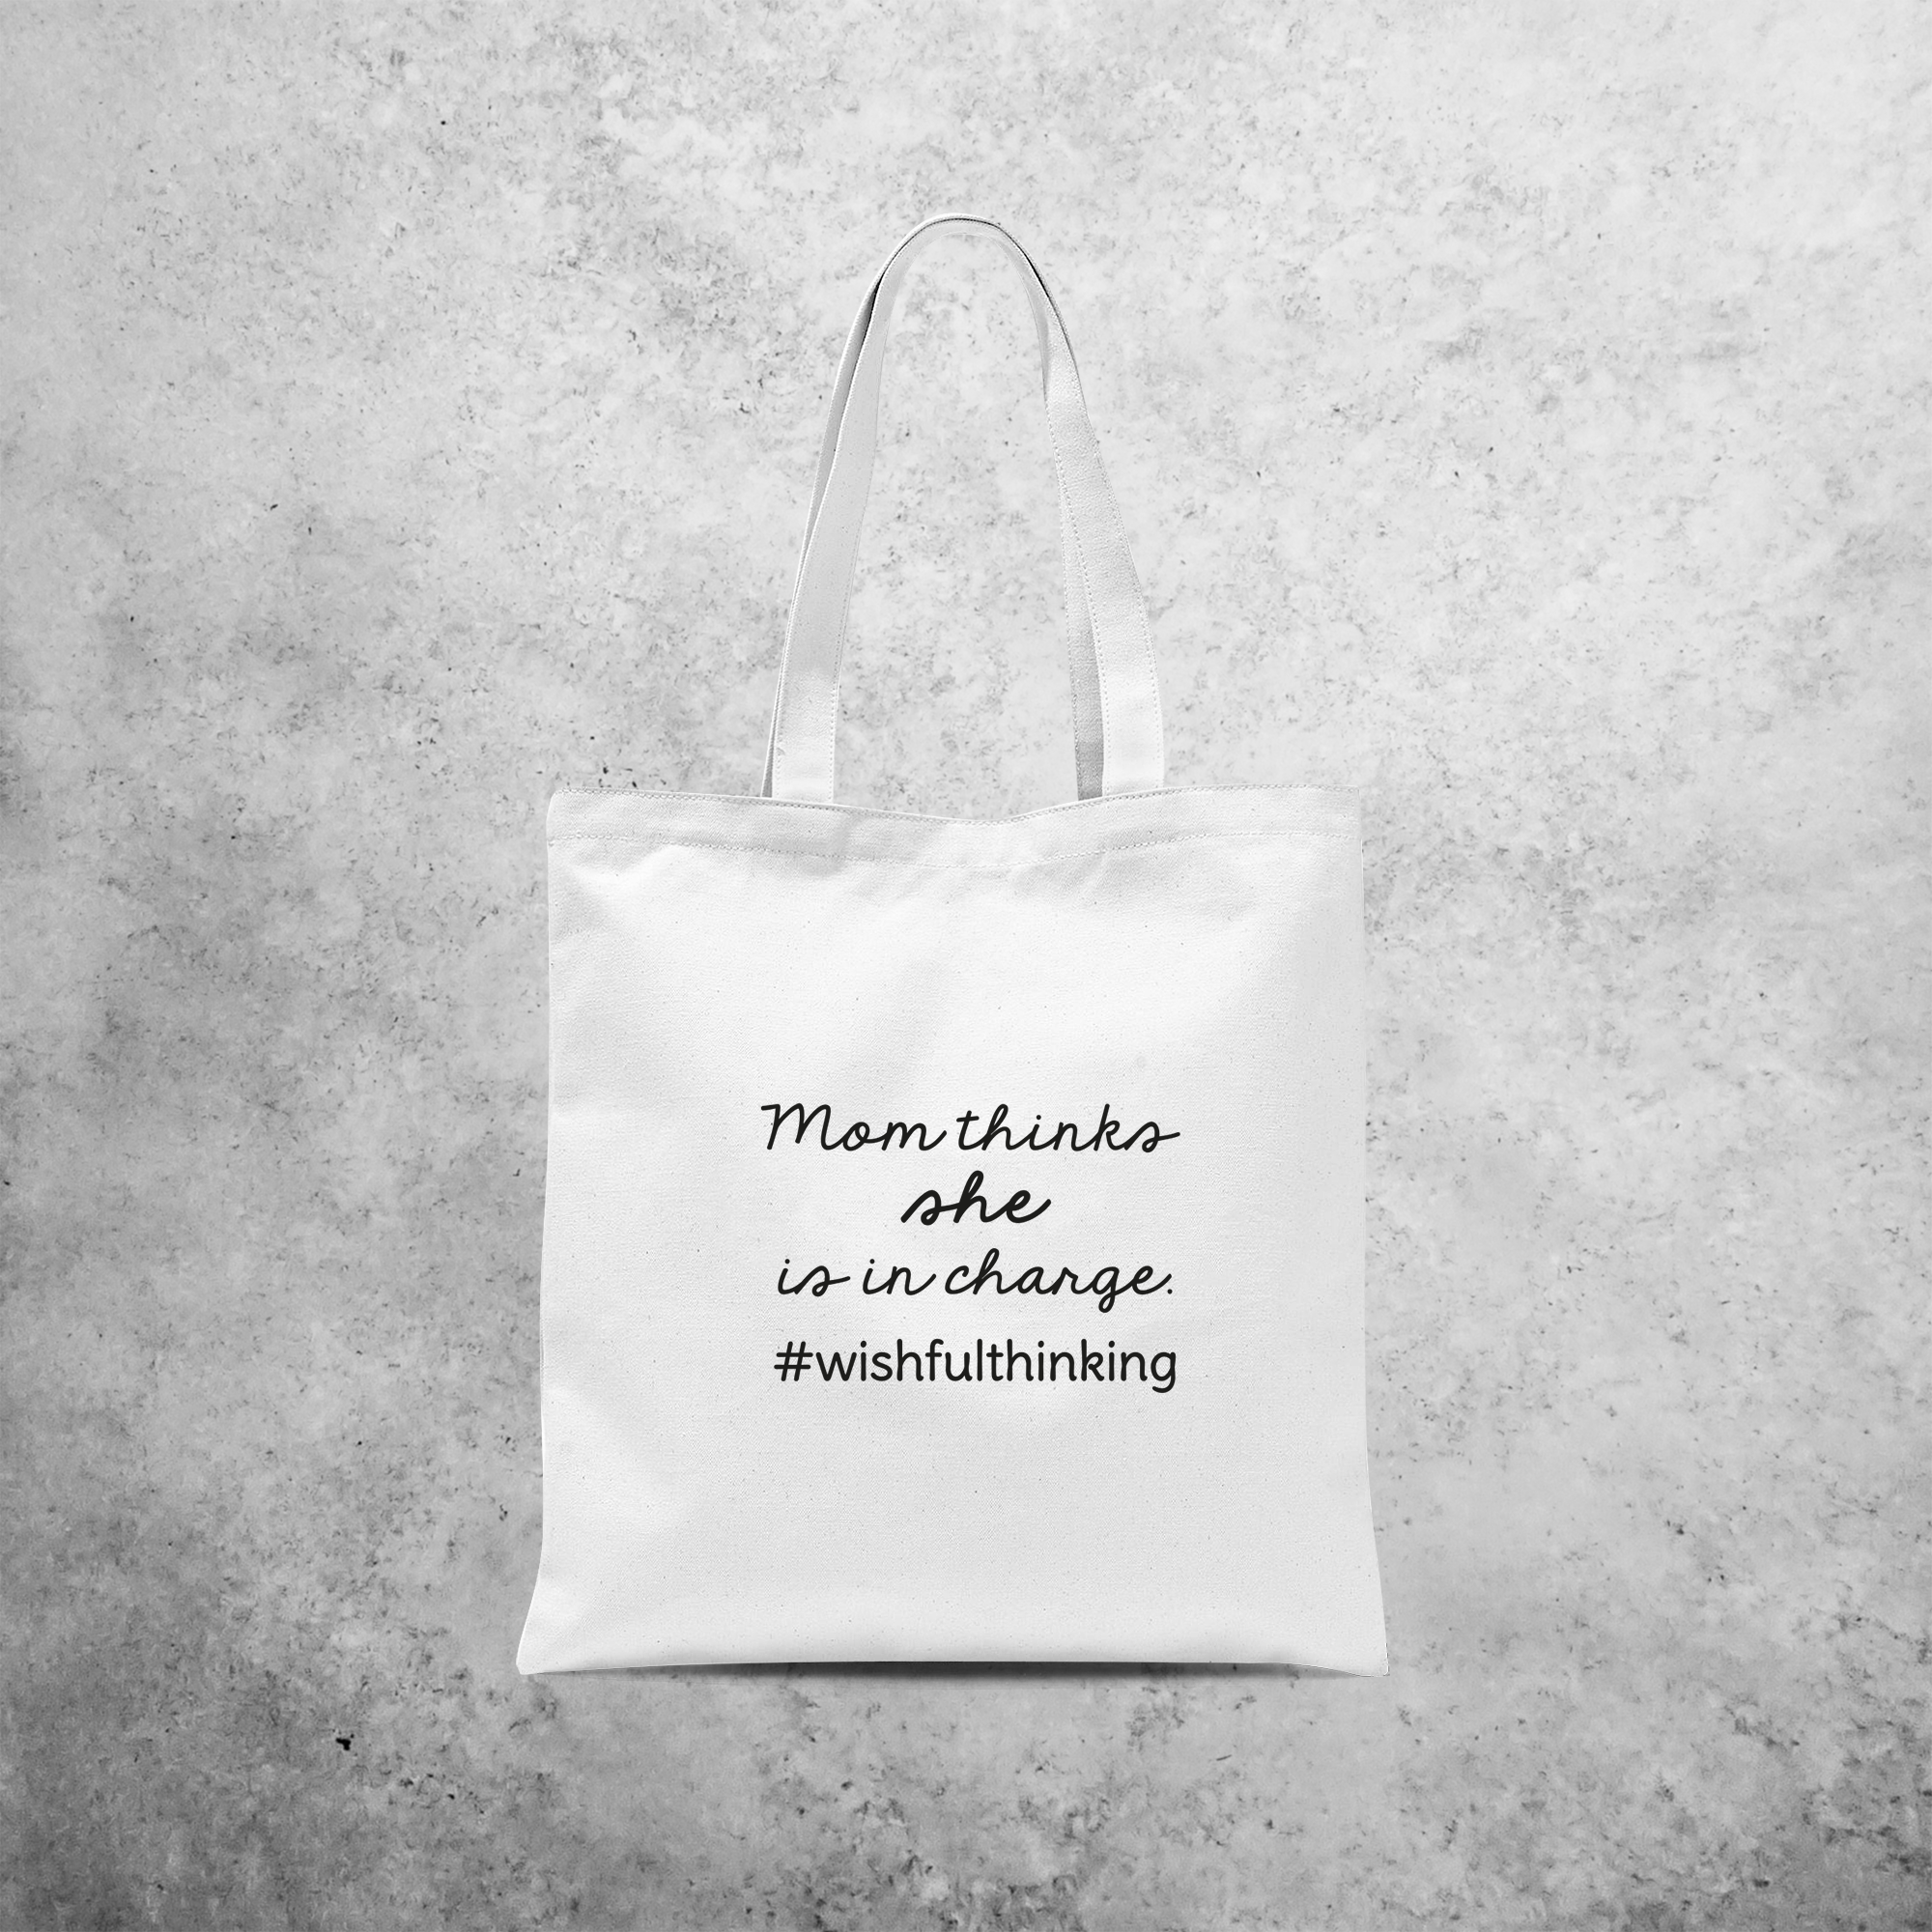 'Mom thinks she is in charge' tote bag